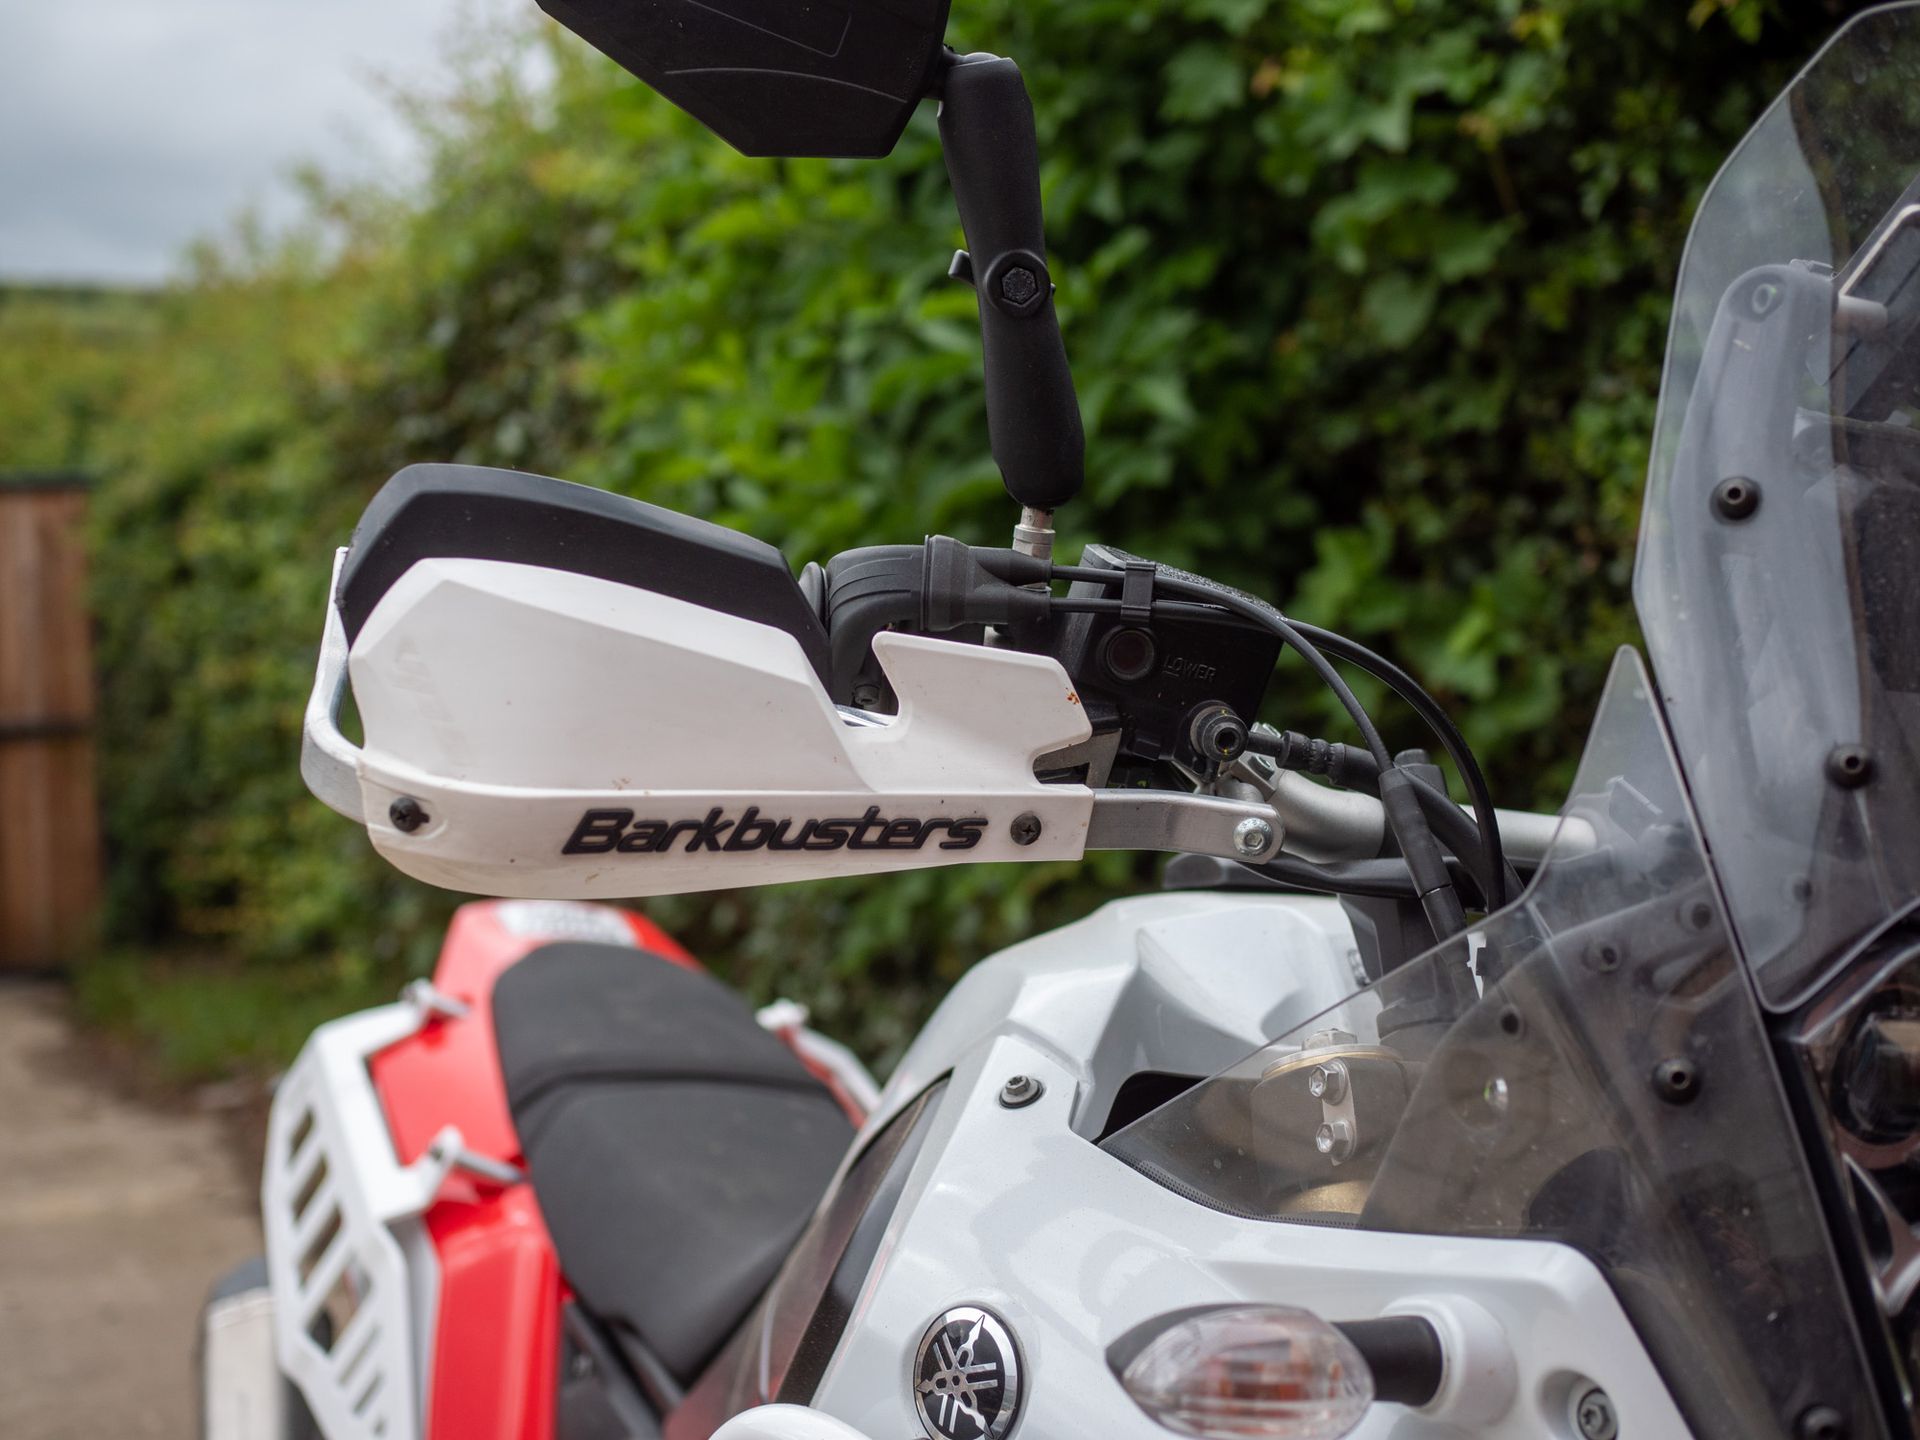 Barkbusters Handguards Fitting Example